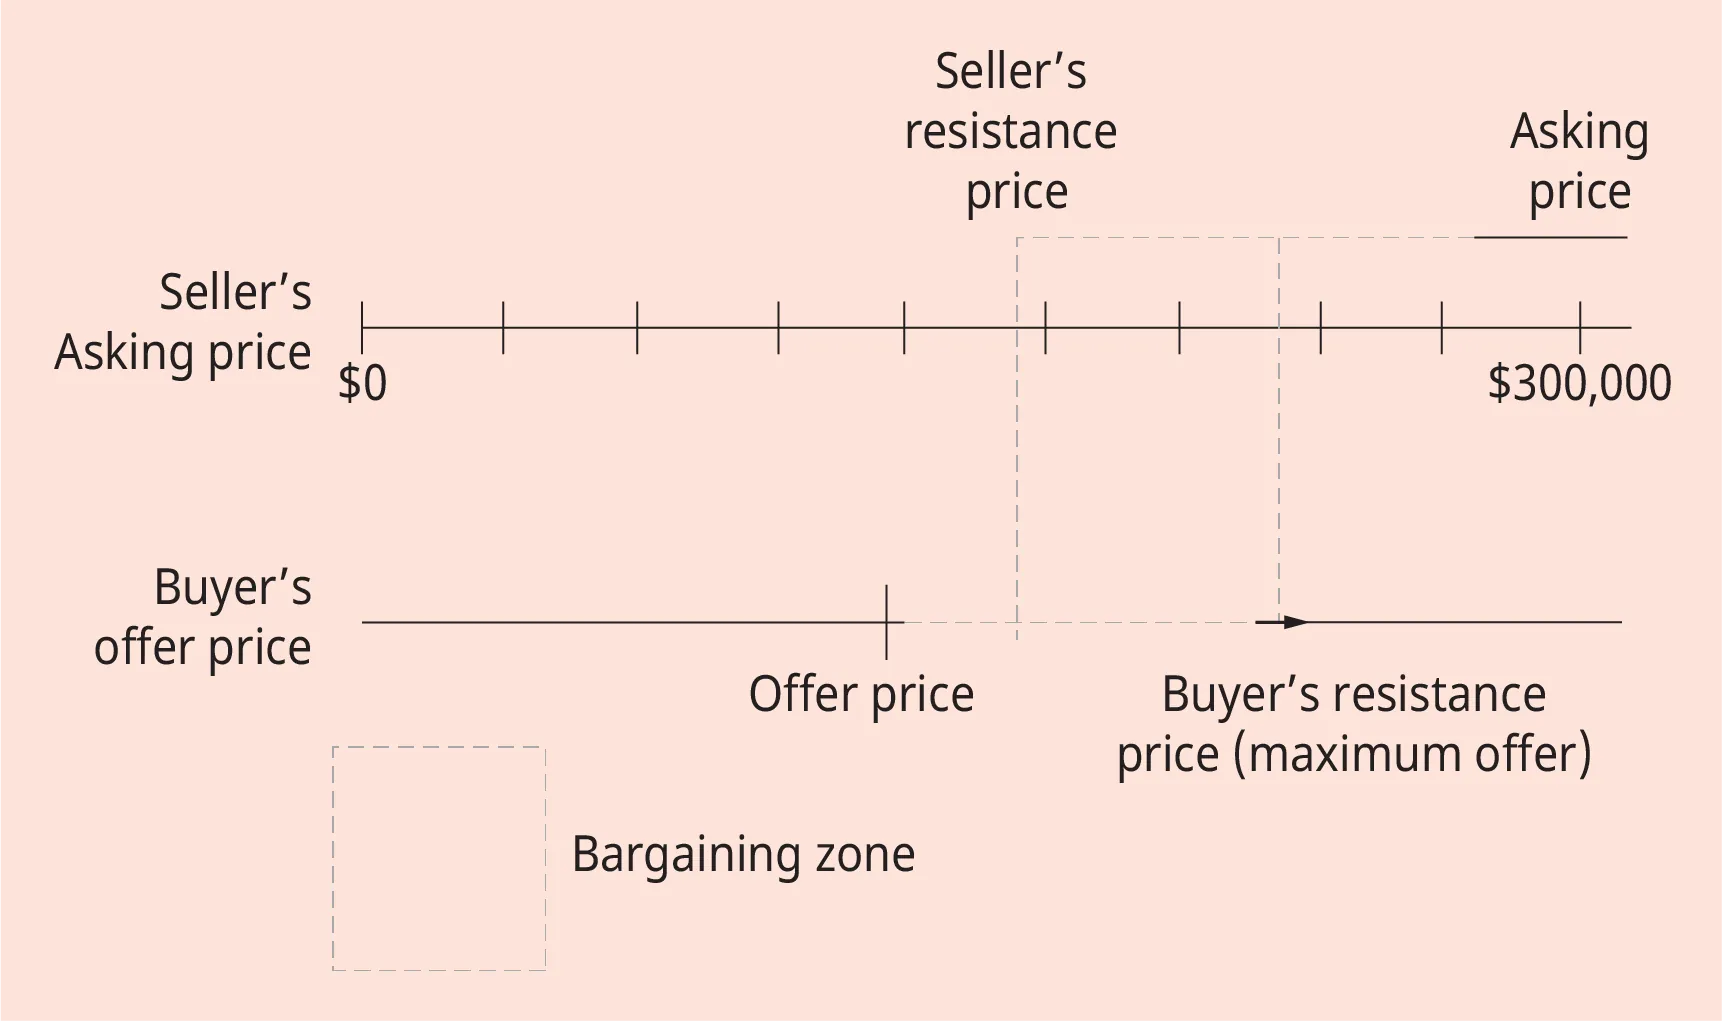 An illustration depicting the distributive bargaining in buying a home.